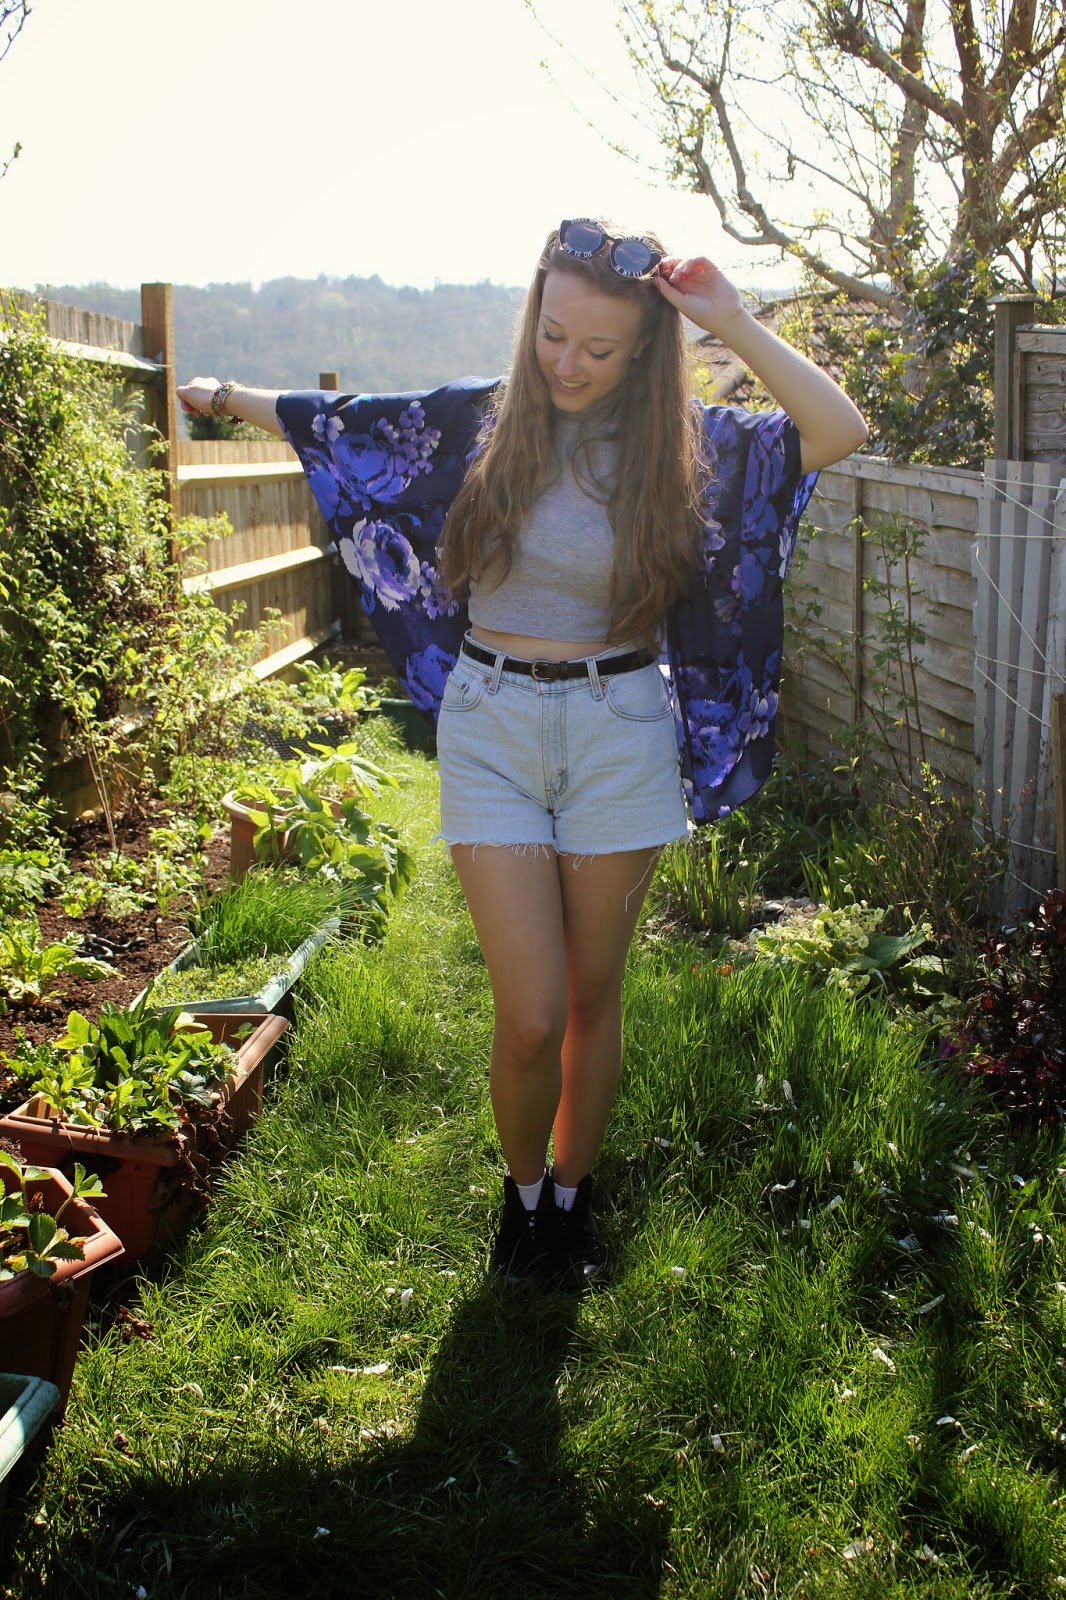 georgie-minter-brown-ootd-outfit-inspiration-blogger-fashion-kimono-new-look-clothes-style-top-topshop-shorts-levis-trainers-converse-sunglasses